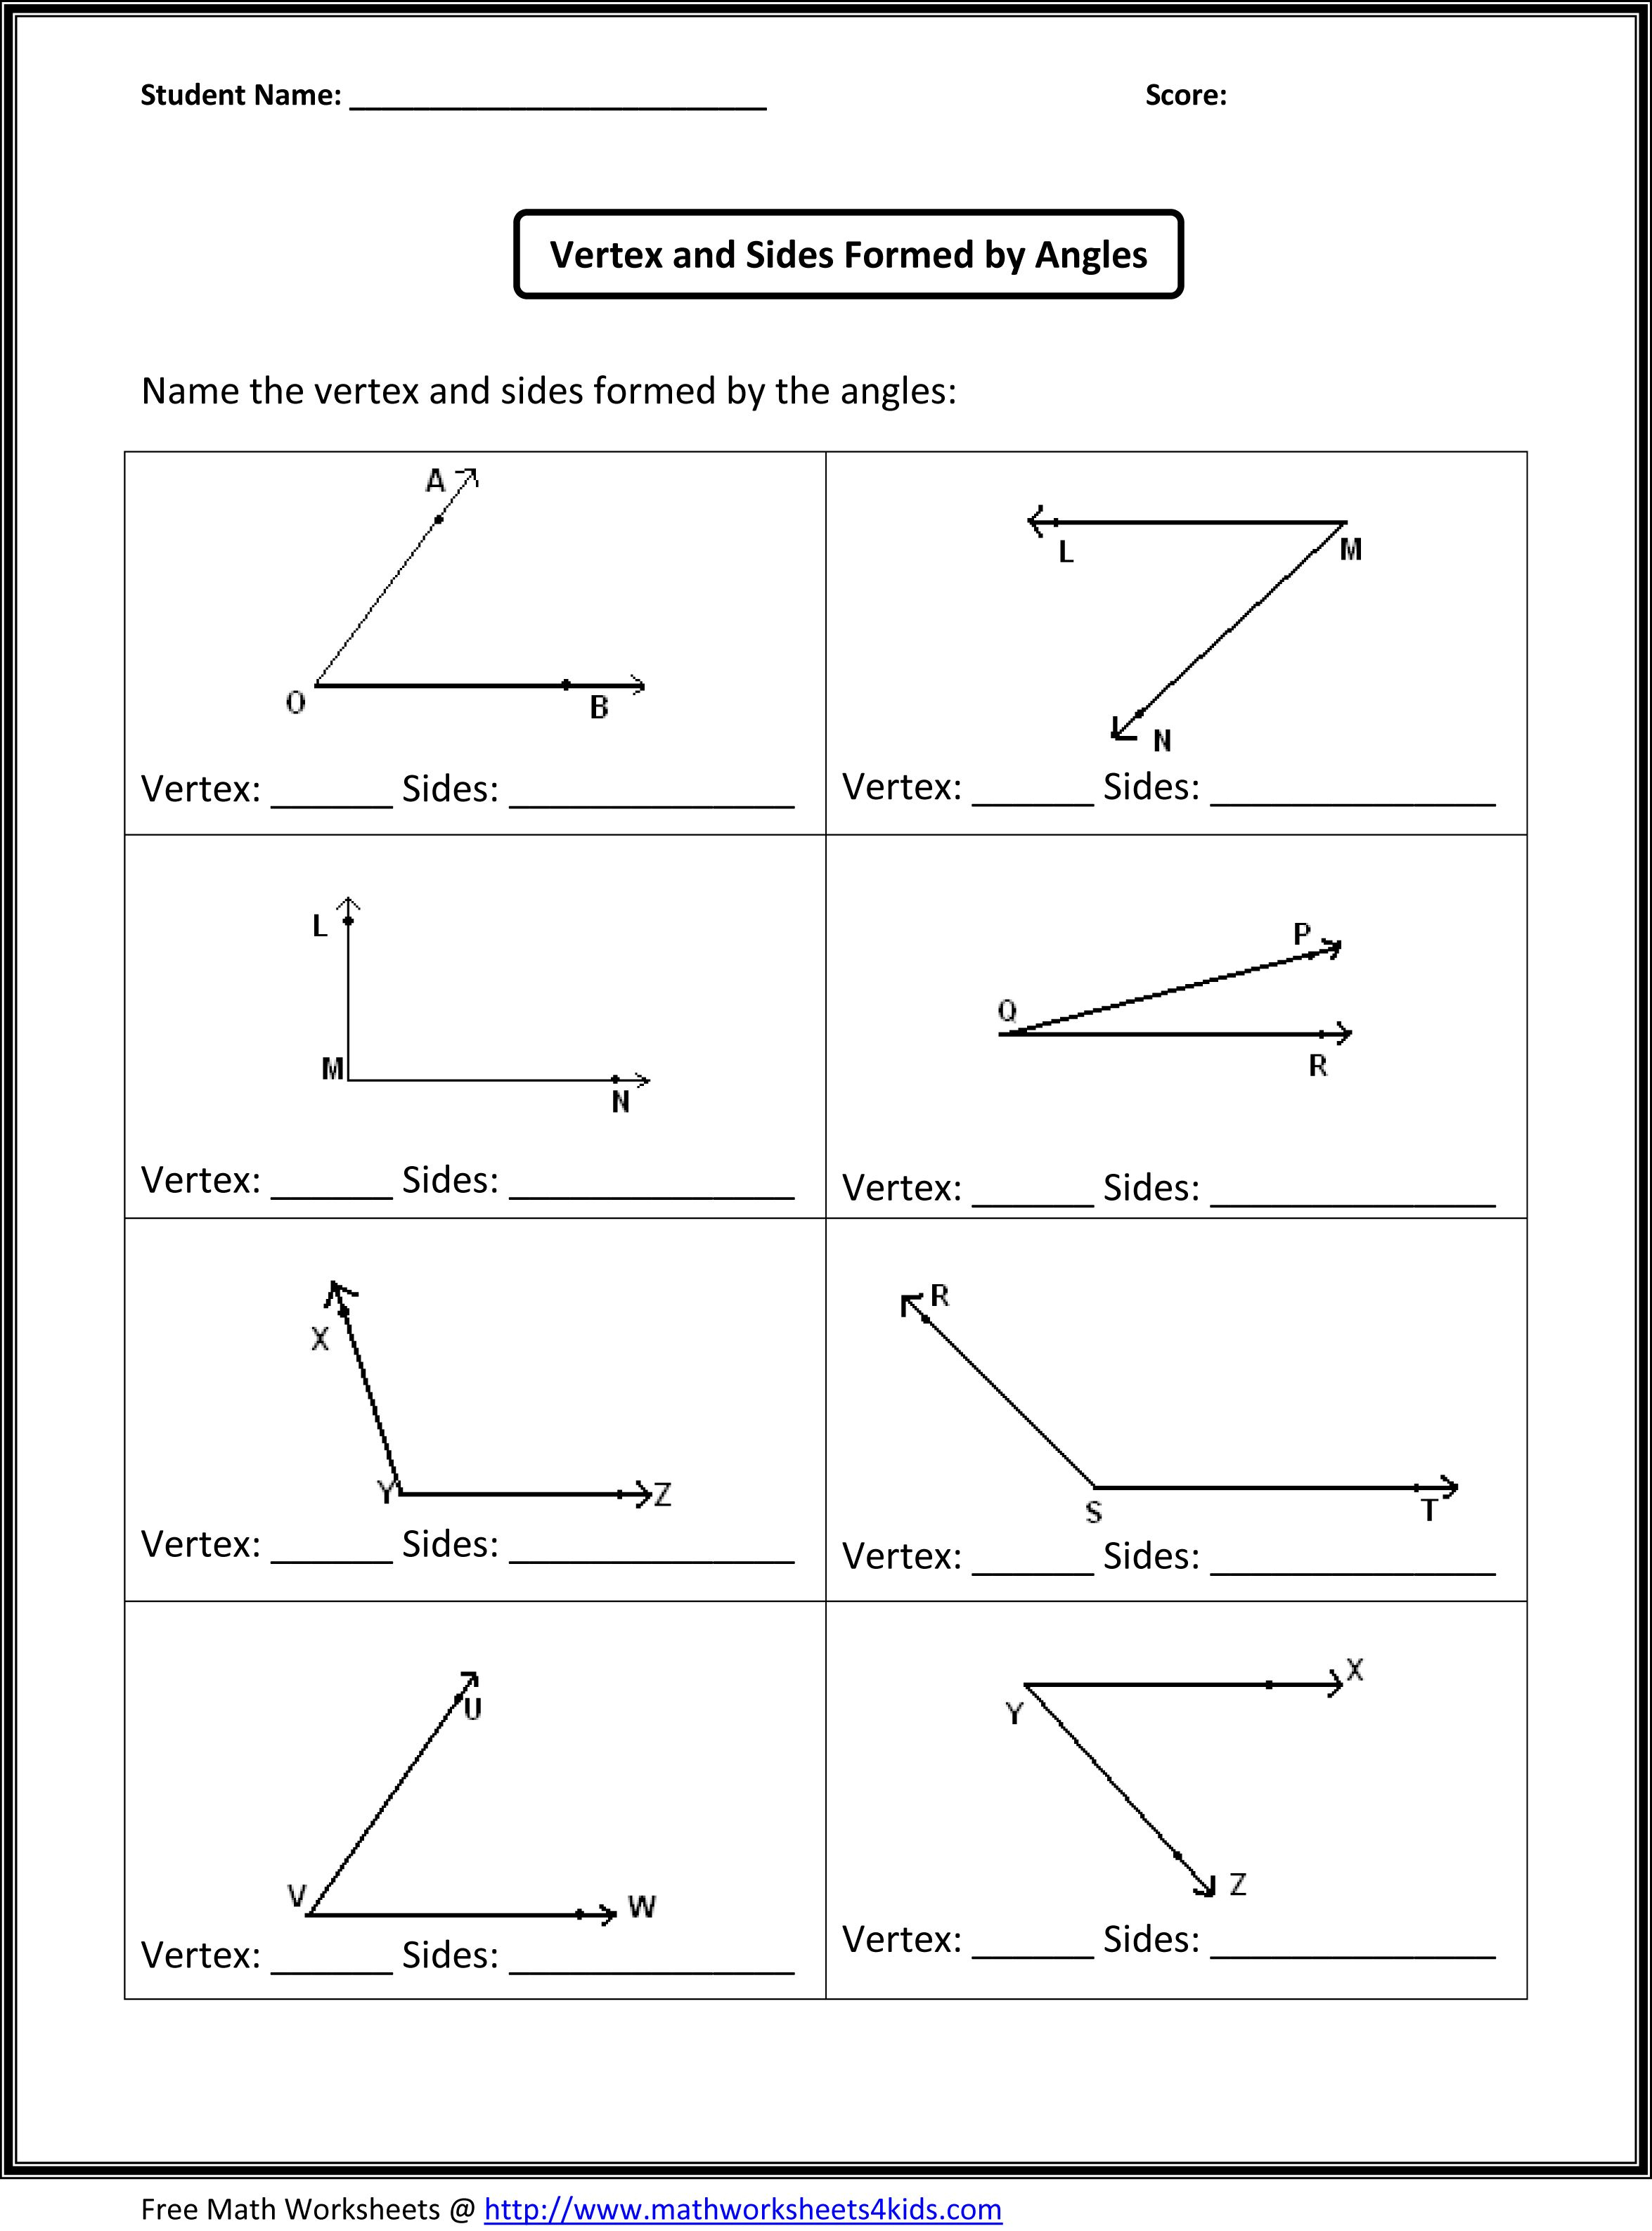 Fourth Grade Math Worksheets Printable Worksheets For Everything - Free Printable Fun Math Worksheets For 4Th Grade